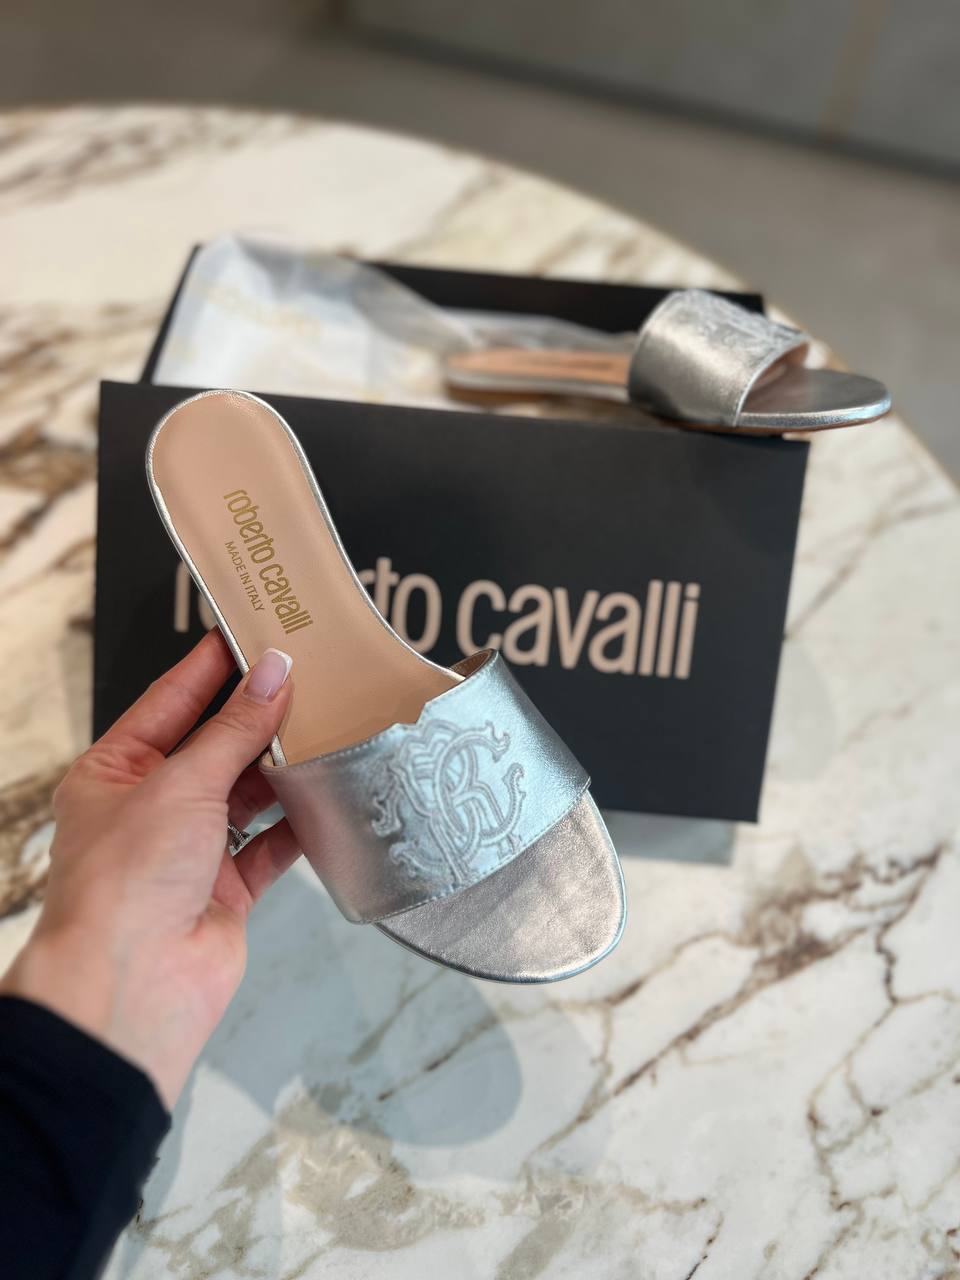 Roberto Cavalli Outlets 5901